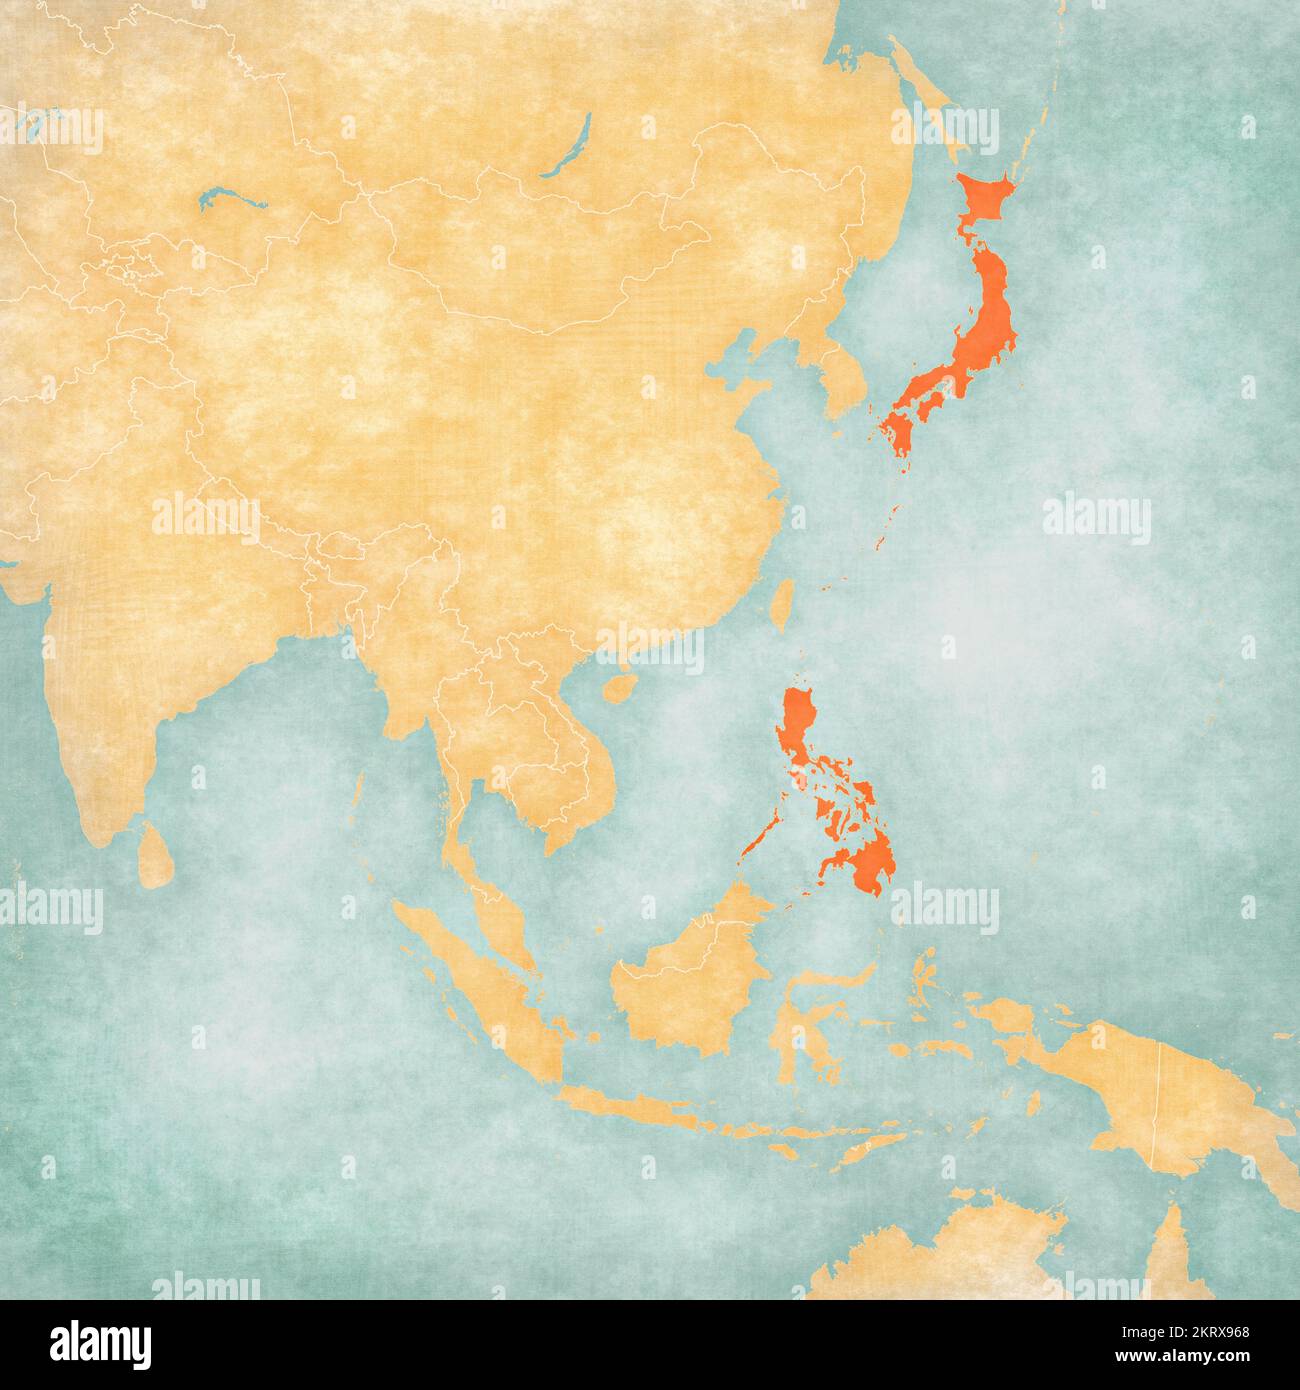 Japan and Philippines on the map of East and Southeast Asia in soft grunge and vintage style, like old paper with watercolor painting. Stock Photo